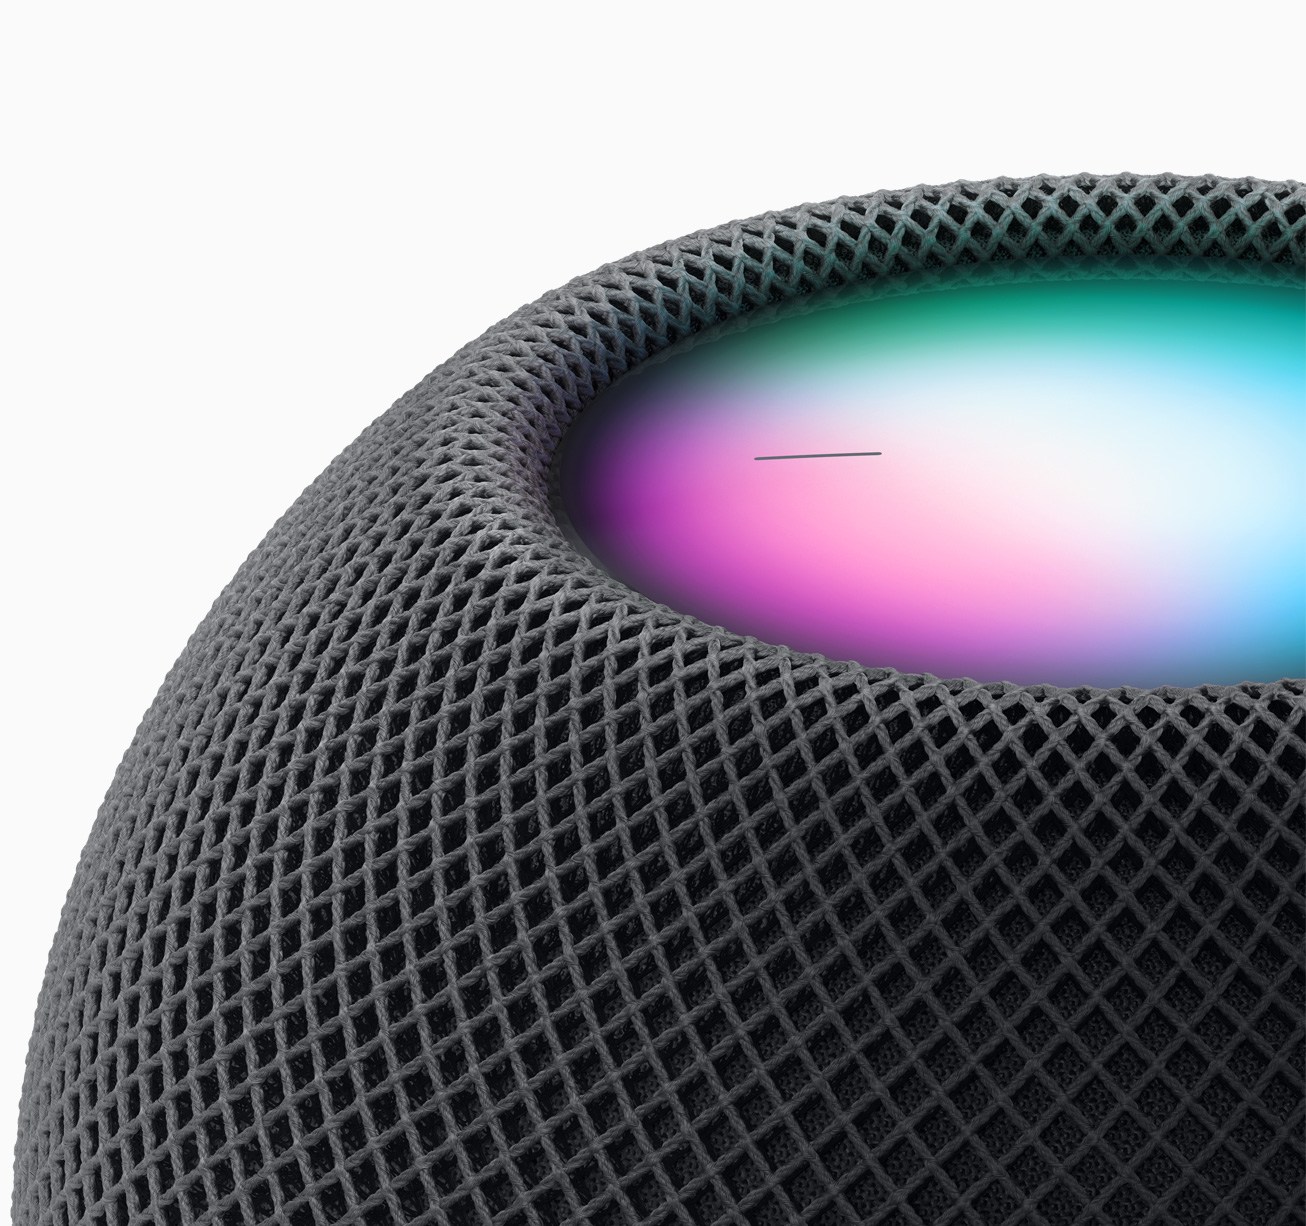 Two Months with the HomePod mini: More Than Meets the Eye - MacStories